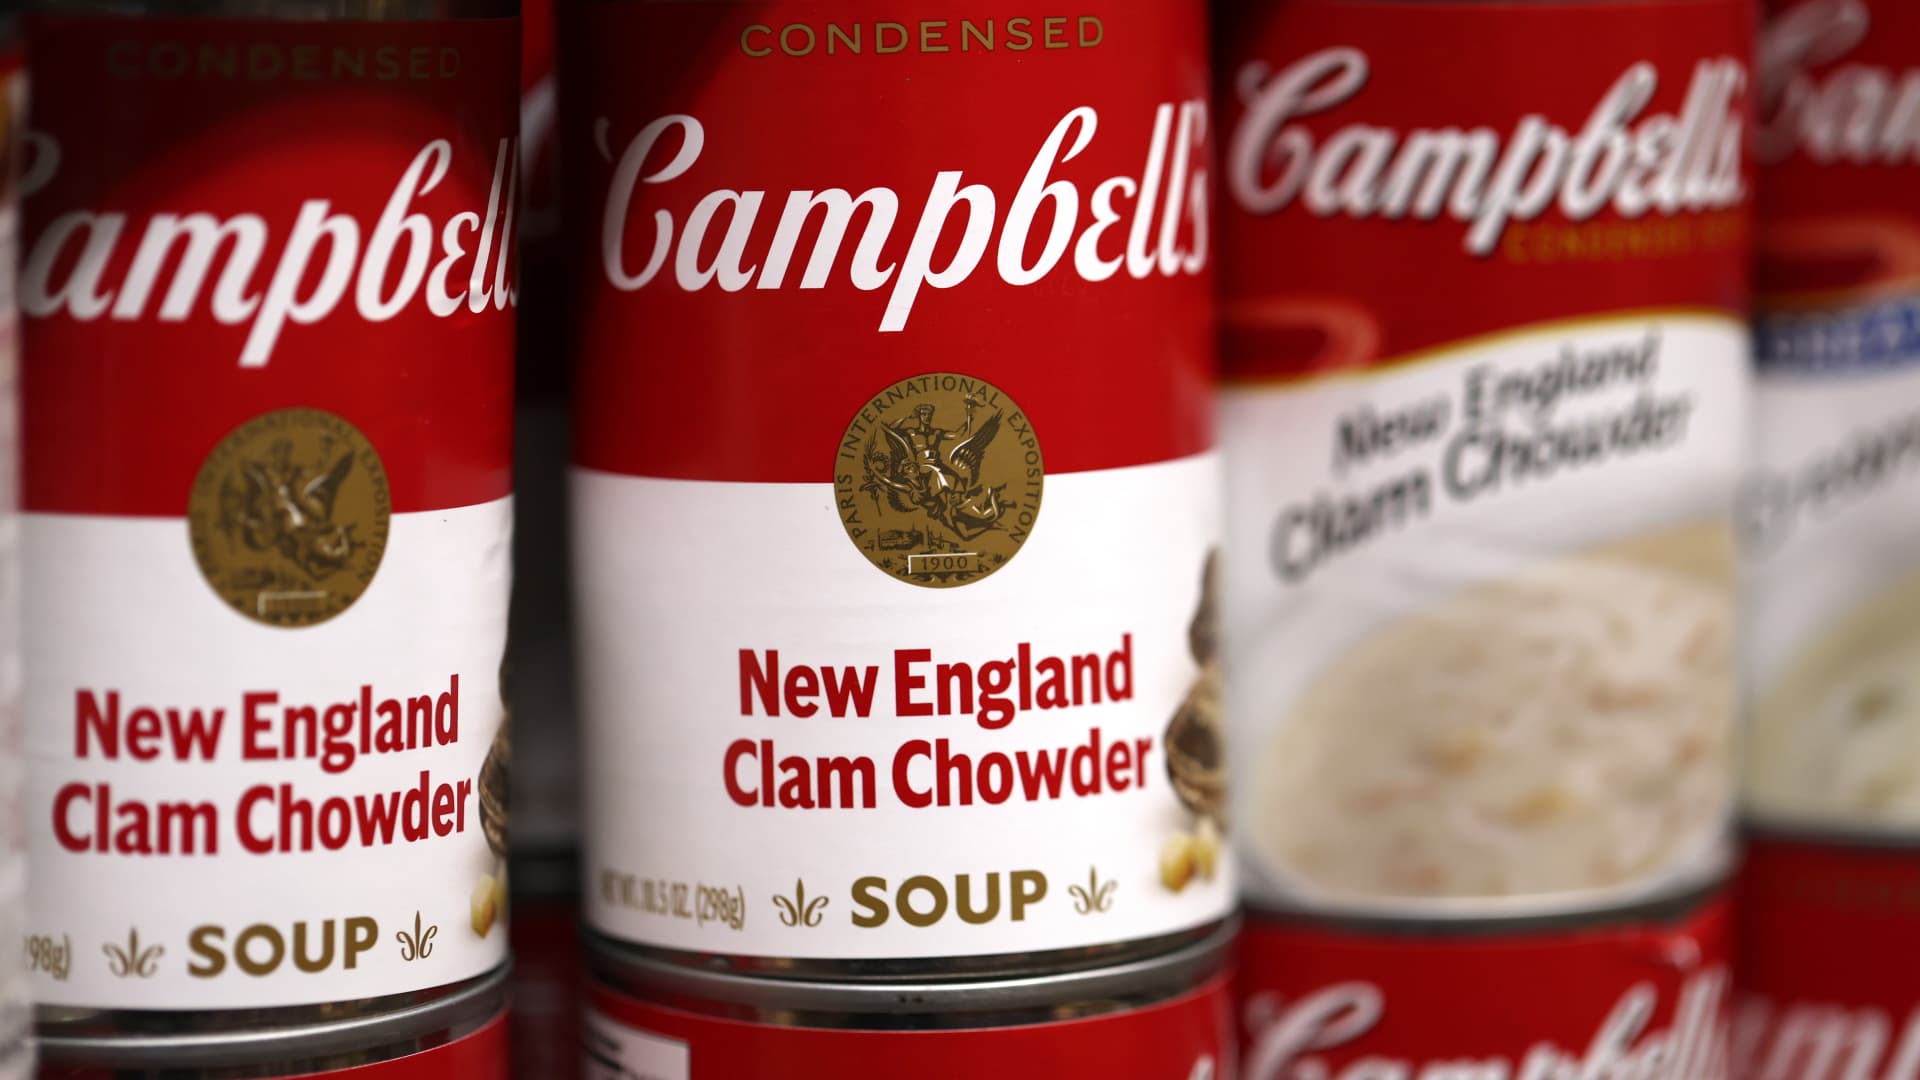 Campbell Soup, Moderna, Western Digital and others